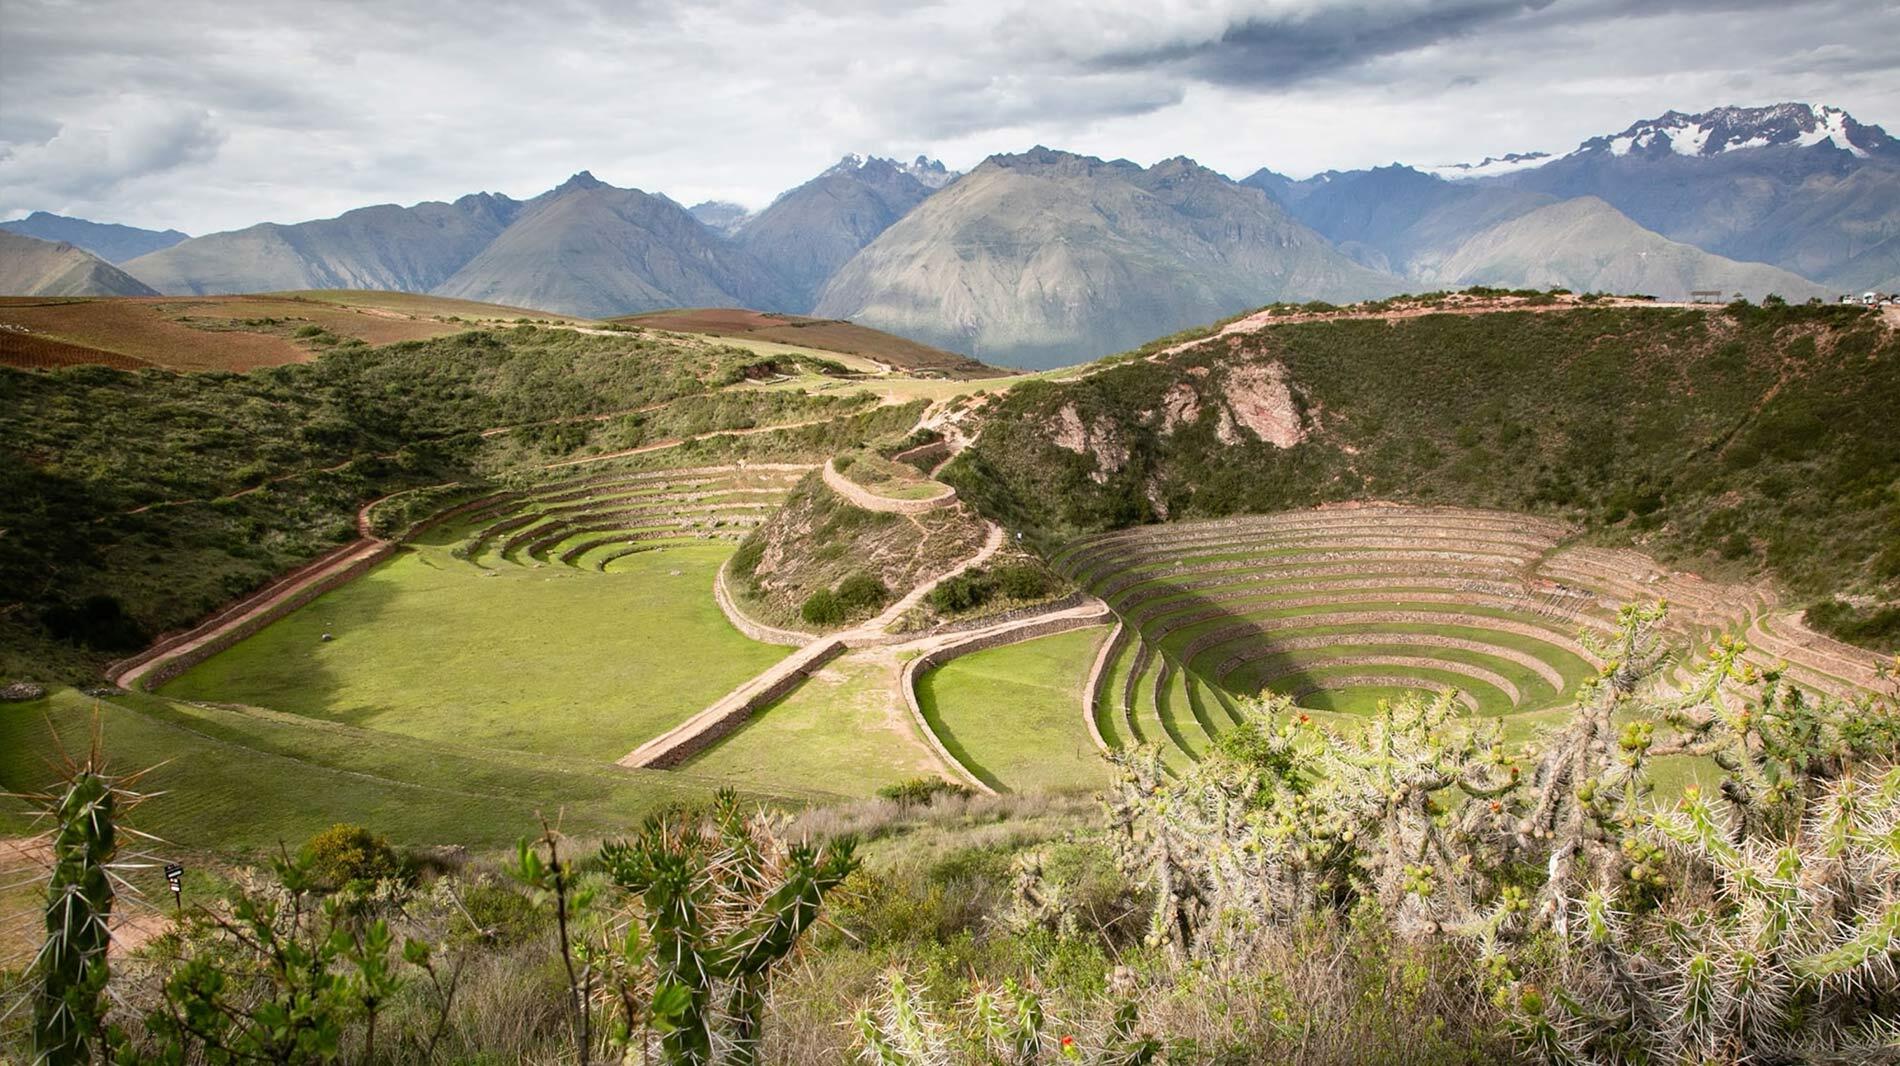 The circular terraces at Moray remain mysterious. The Inca may have used the site for agricultural experiments, testing various crops at each level’s microclimate.